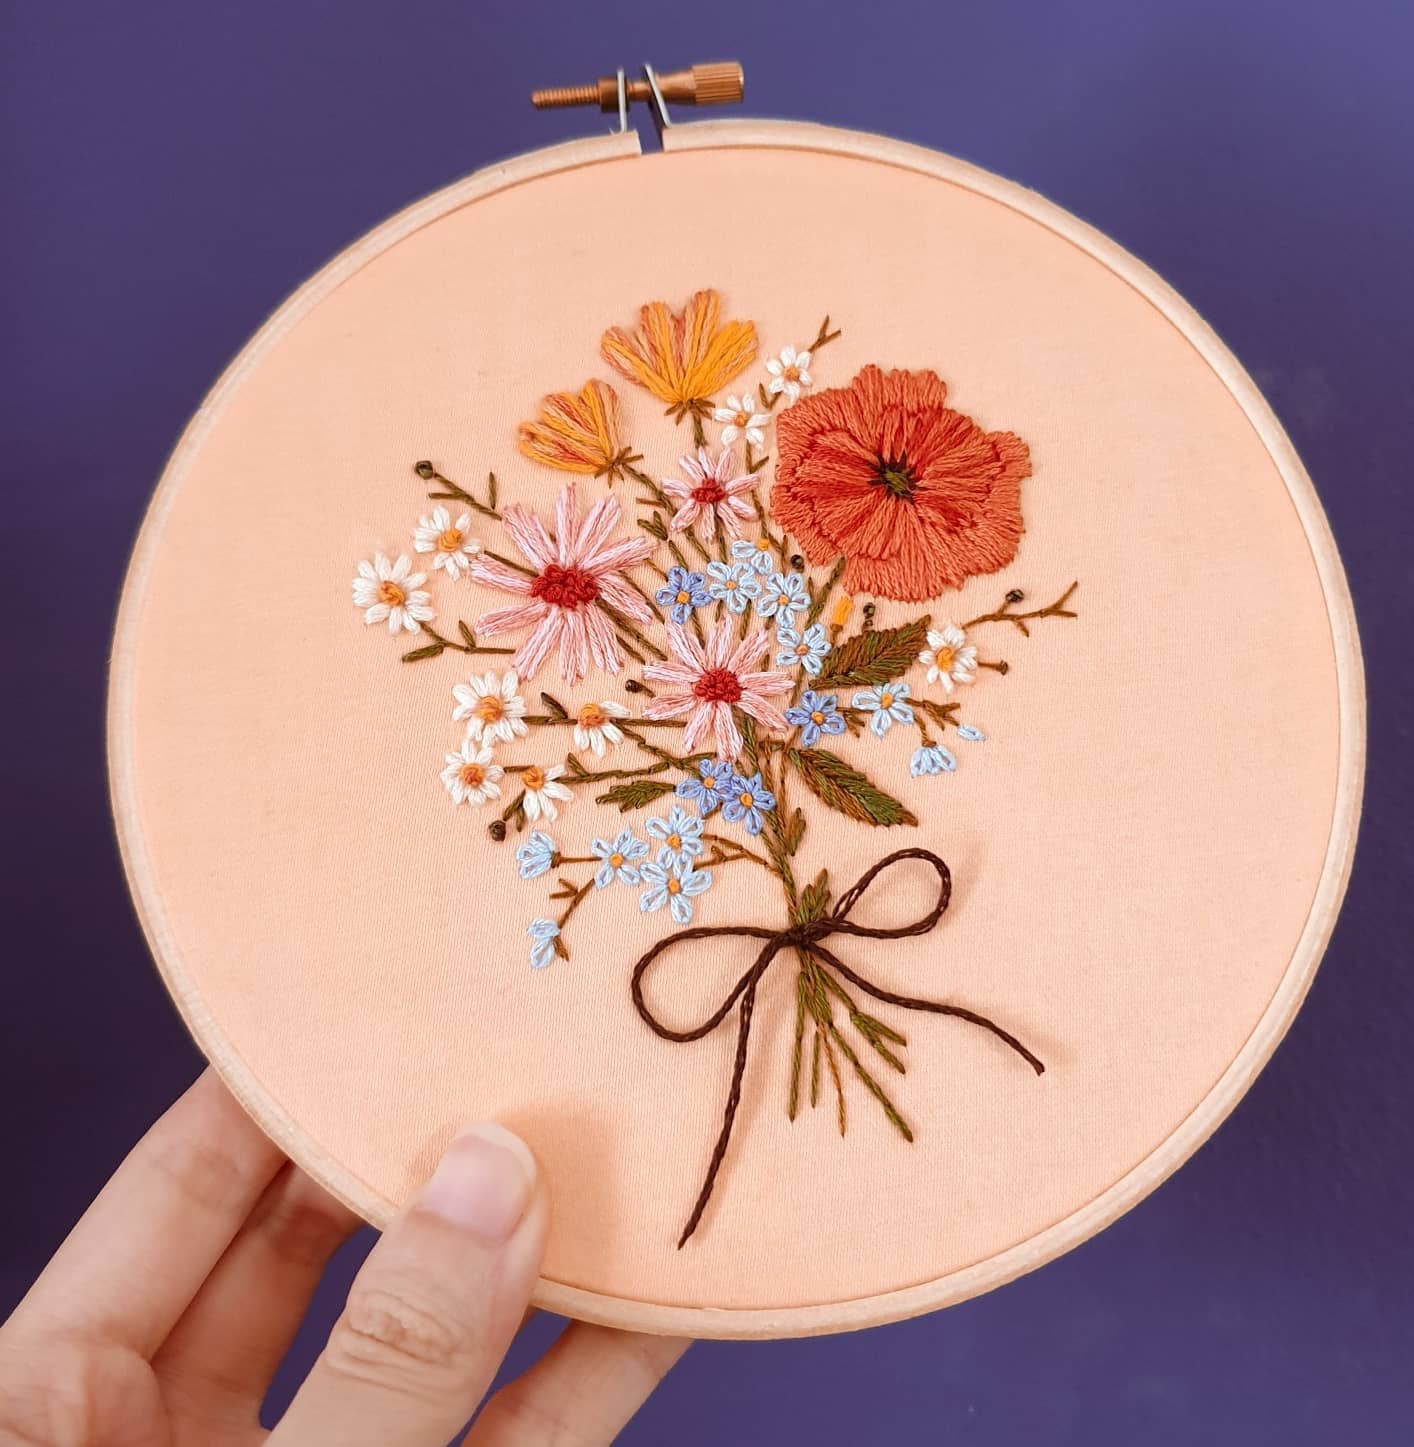 DIY Bouquet Embroidery Kit